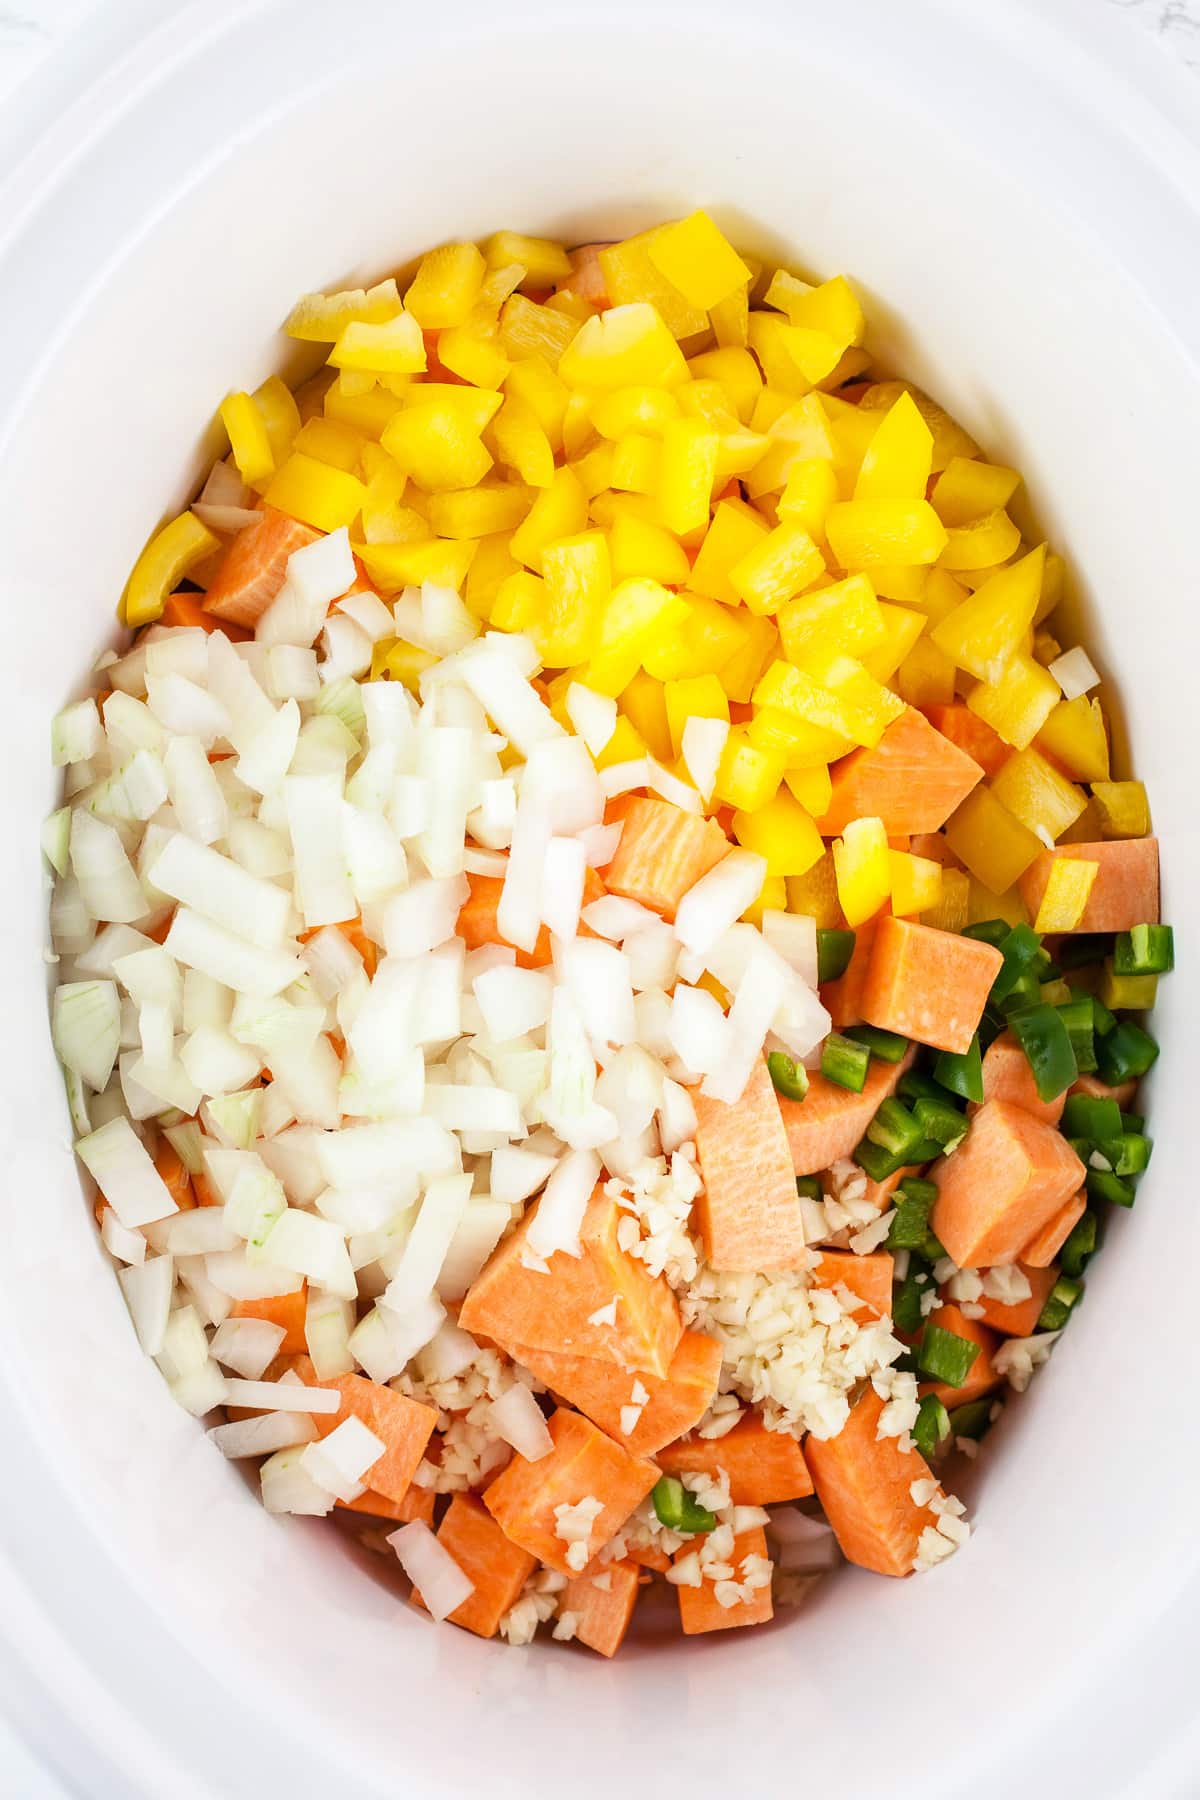 Minced garlic, onions, jalapeno pepper, yellow bell pepper, and sweet potatoes in slow cooker.